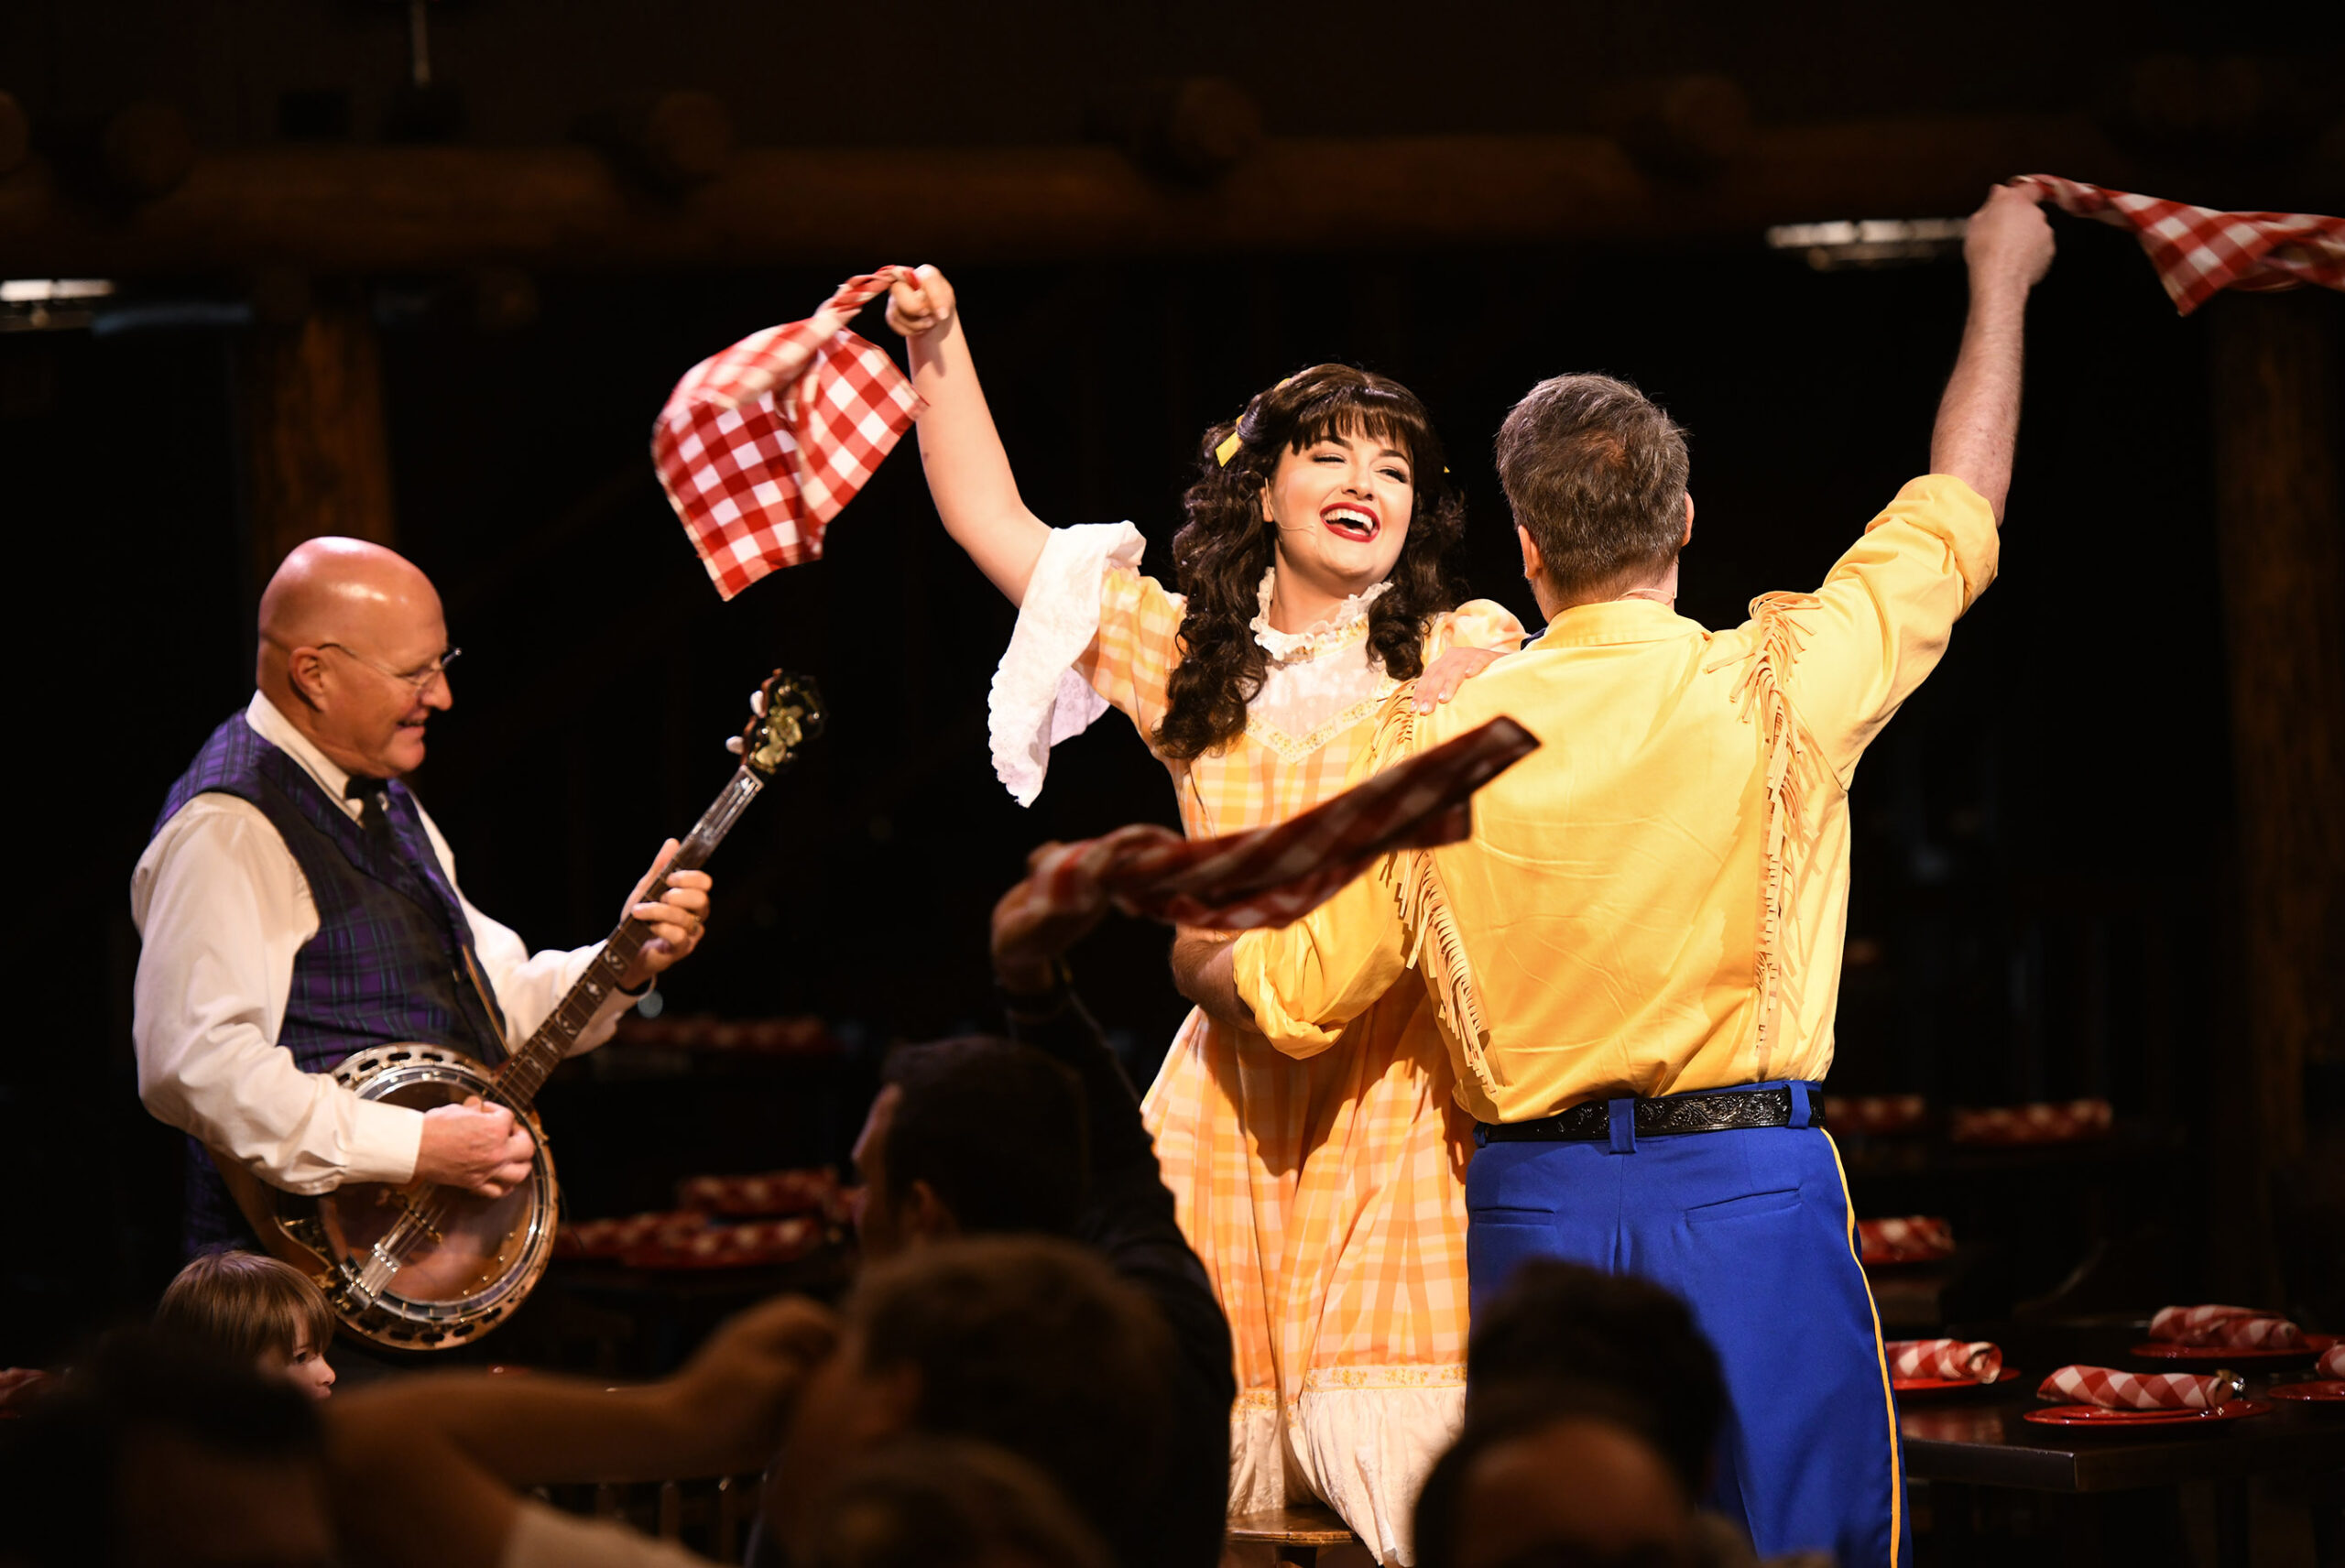 Frontier-style family fun is back on the menu as Hoop-Dee-Doo Musical Revue debuts June 23, 2022, at Disney’s Fort Wilderness Resort and Campground at Walt Disney World Resort in Lake Buena Vista, Fla. This beloved show features a high-spirited musical performance by the Pioneer Hall Players complete with foot-stompin' folk songs, singing, dancing, zany comedy, and a fantastic feast—all in the rustic setting of an Old West dance hall. Now in its 48th year, Hoop-Dee-Doo Musical Revue is one of the longest-running dinner shows in the United States. (Mark Ashman, Photographer)